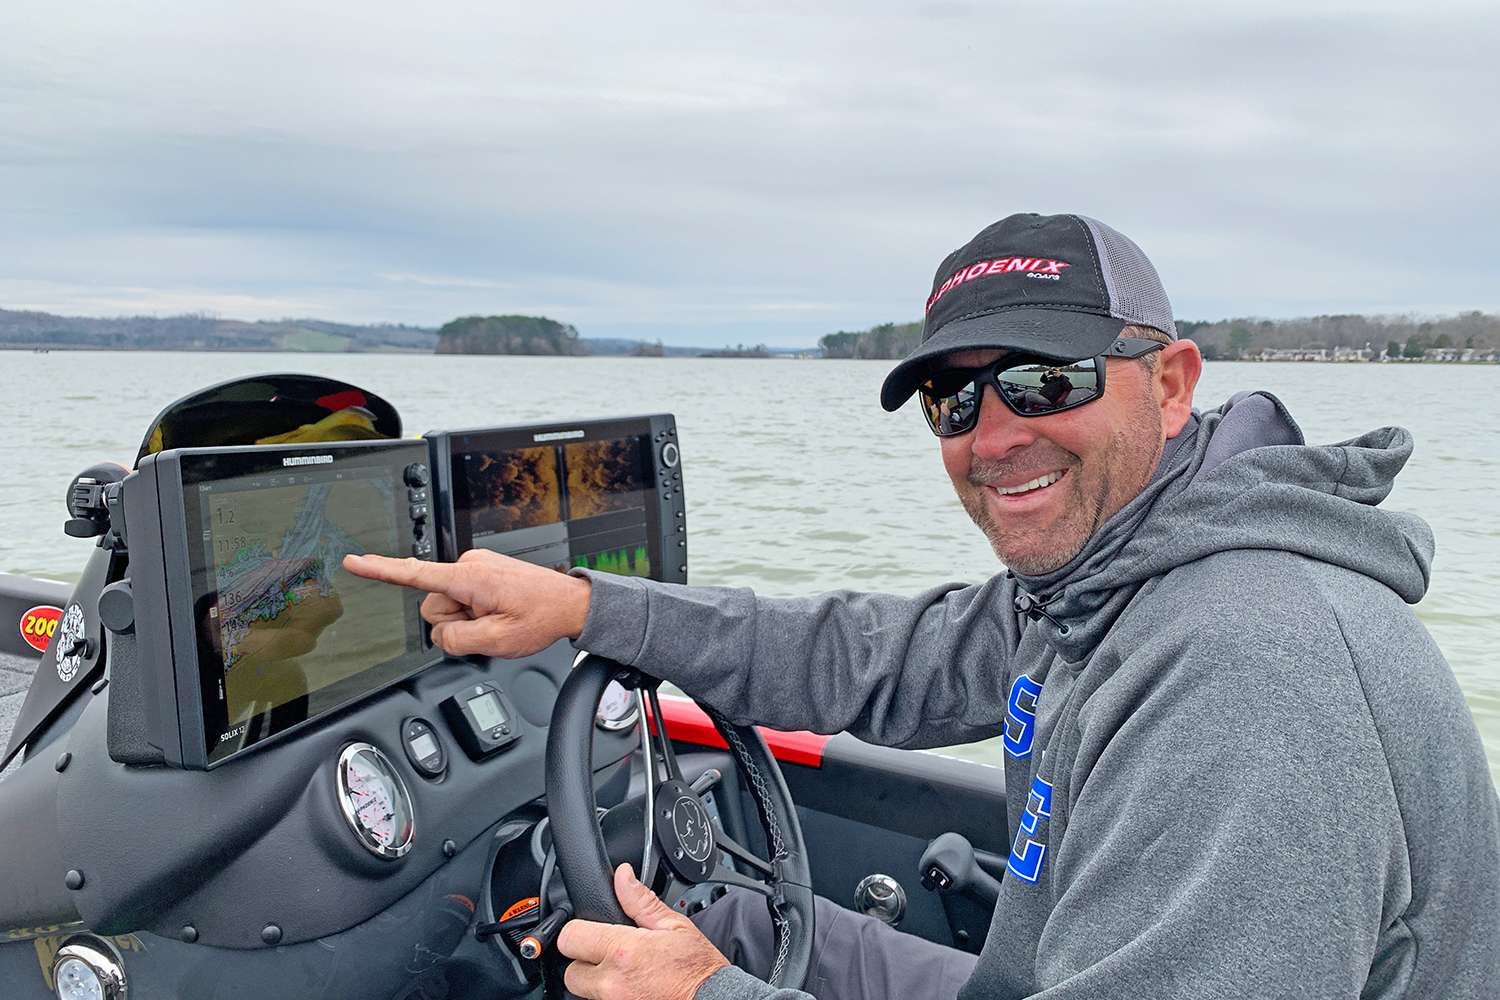 With his Humminbirds cued up with Lakemaster mapping, we headed out with a goal to put the Bassmaster drone up and dodge a few raindrops while gathering lots of killer aerial photography of the legendary lake. 